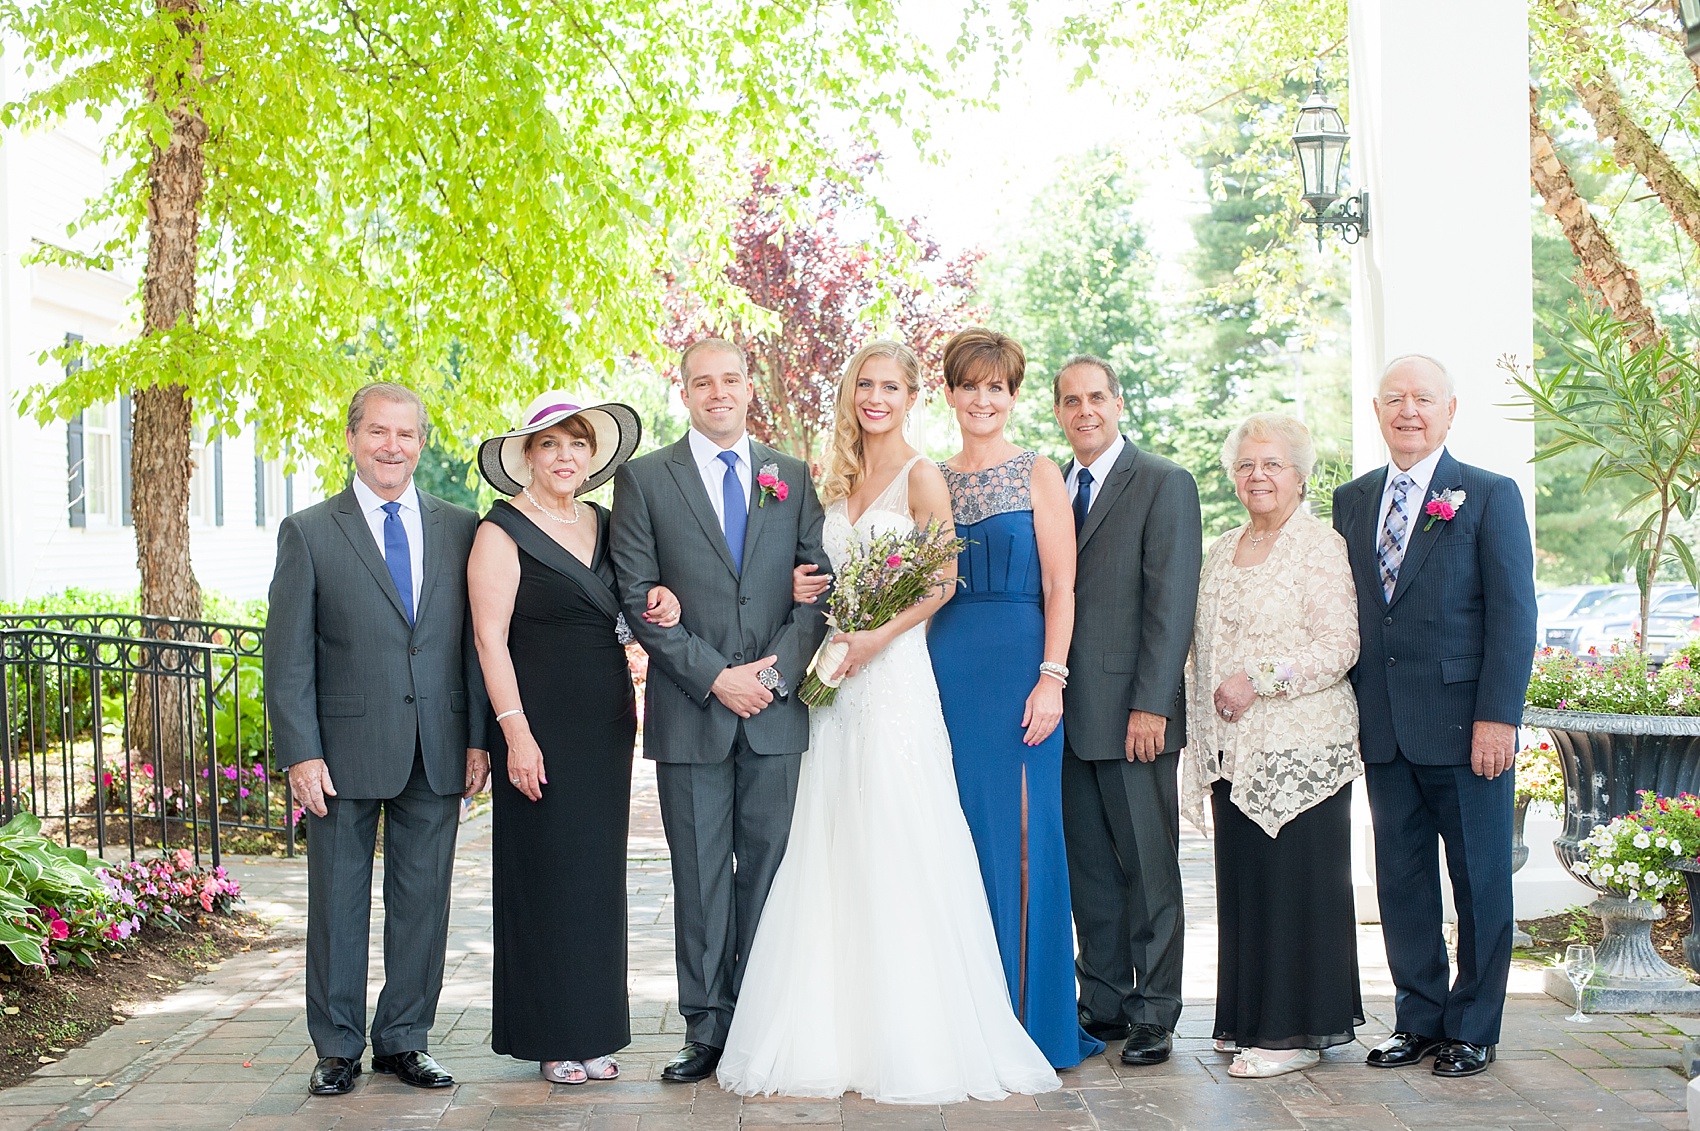 Beautiful family photo during an outdoor summer wedding in New Jersey. Photo by Mikkel Paige Photography.